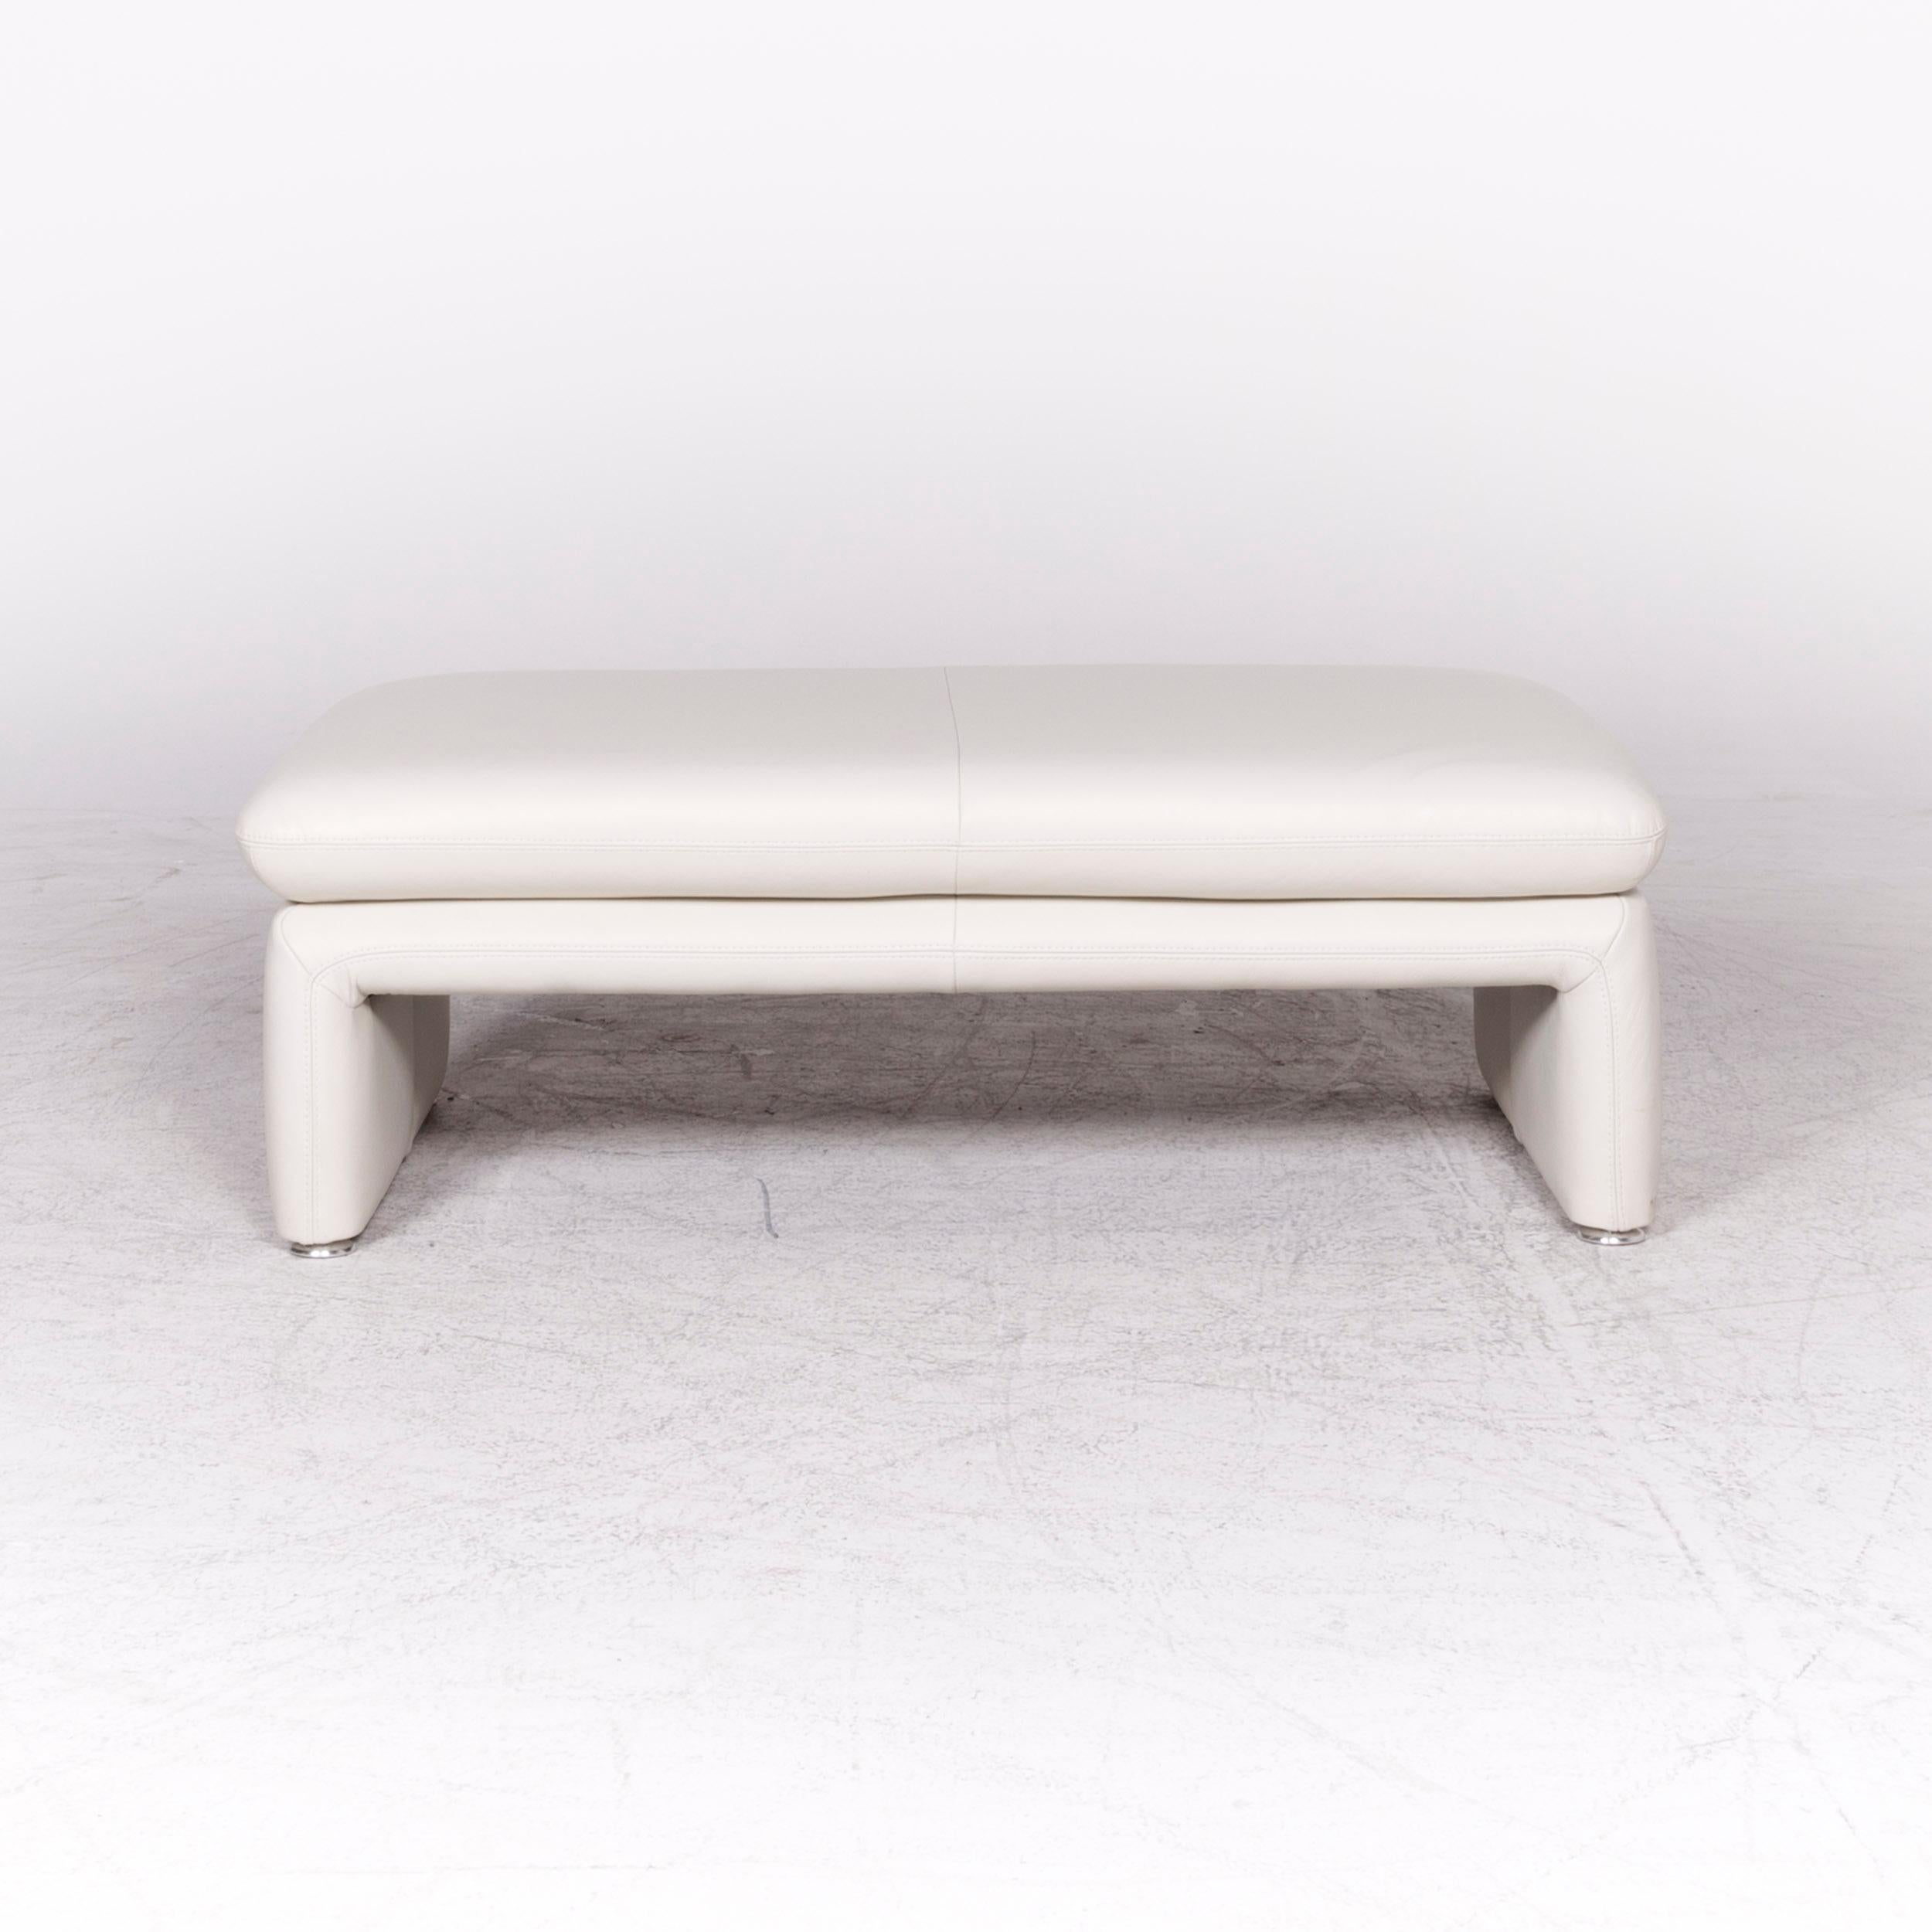 Willi Schillig Brooklyn Designer Leather Stool White Genuine Leather Stool For Sale 3